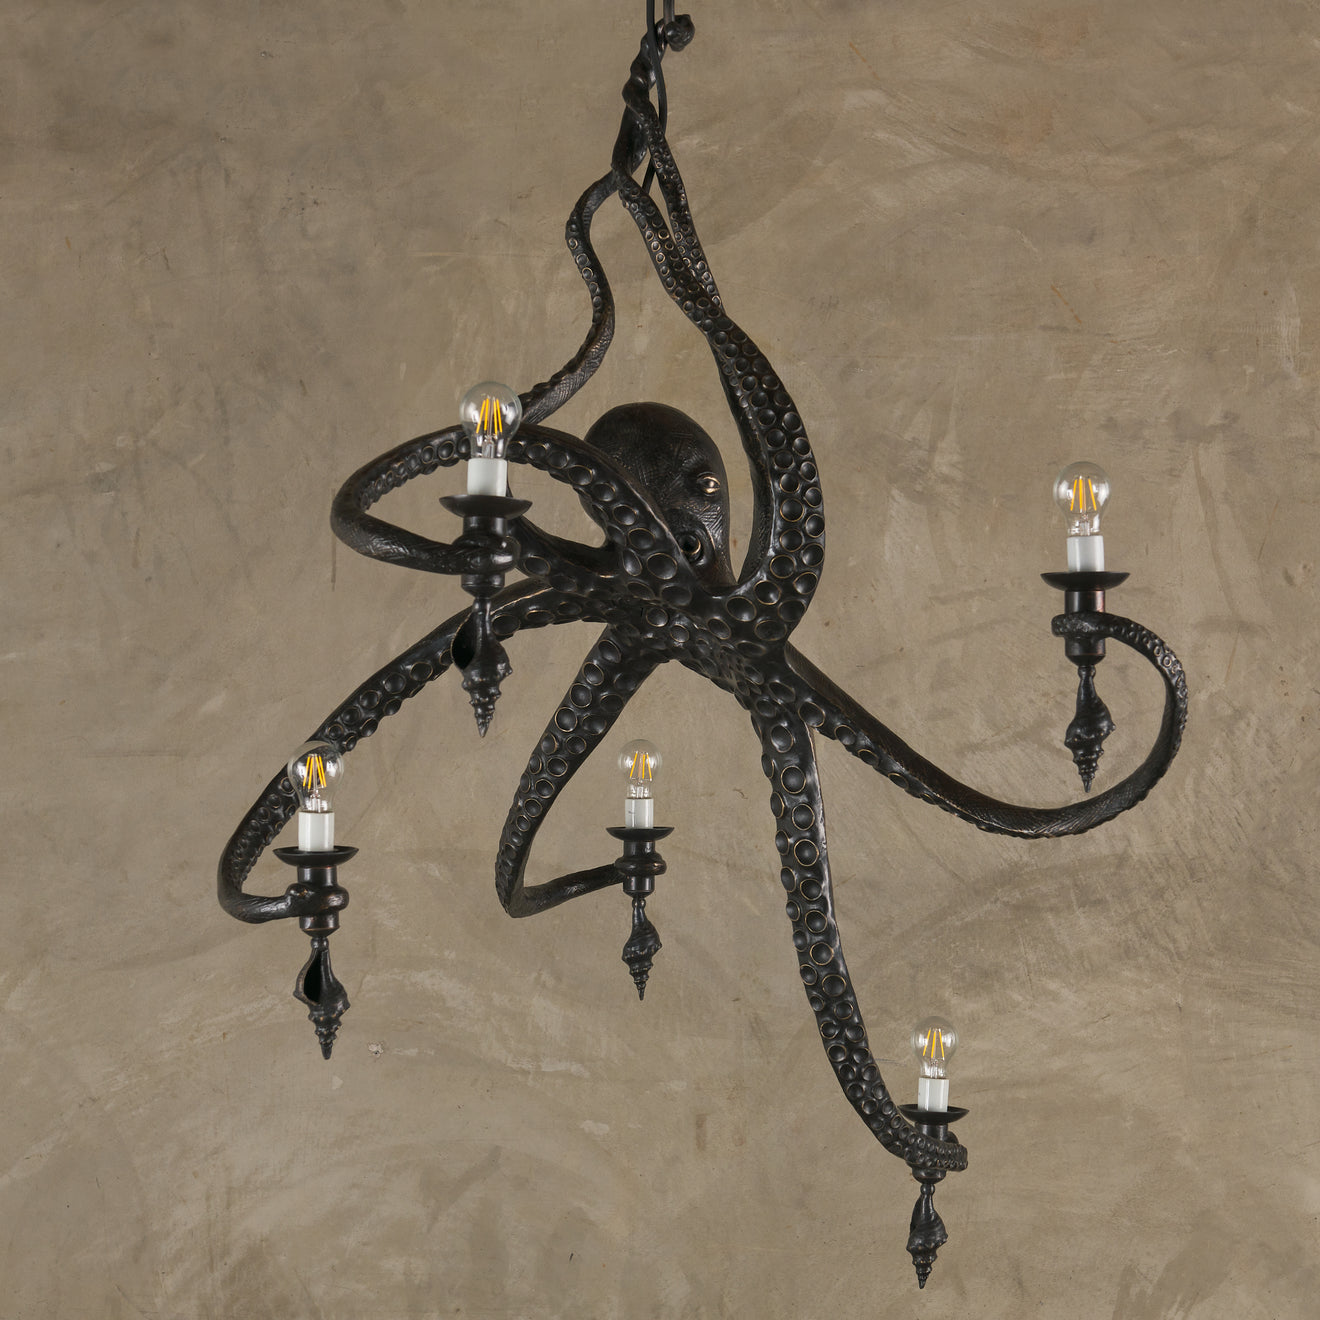 LIFESIZE OCTOPUS CHANDELIER BY BRADLEY CLIFFORD